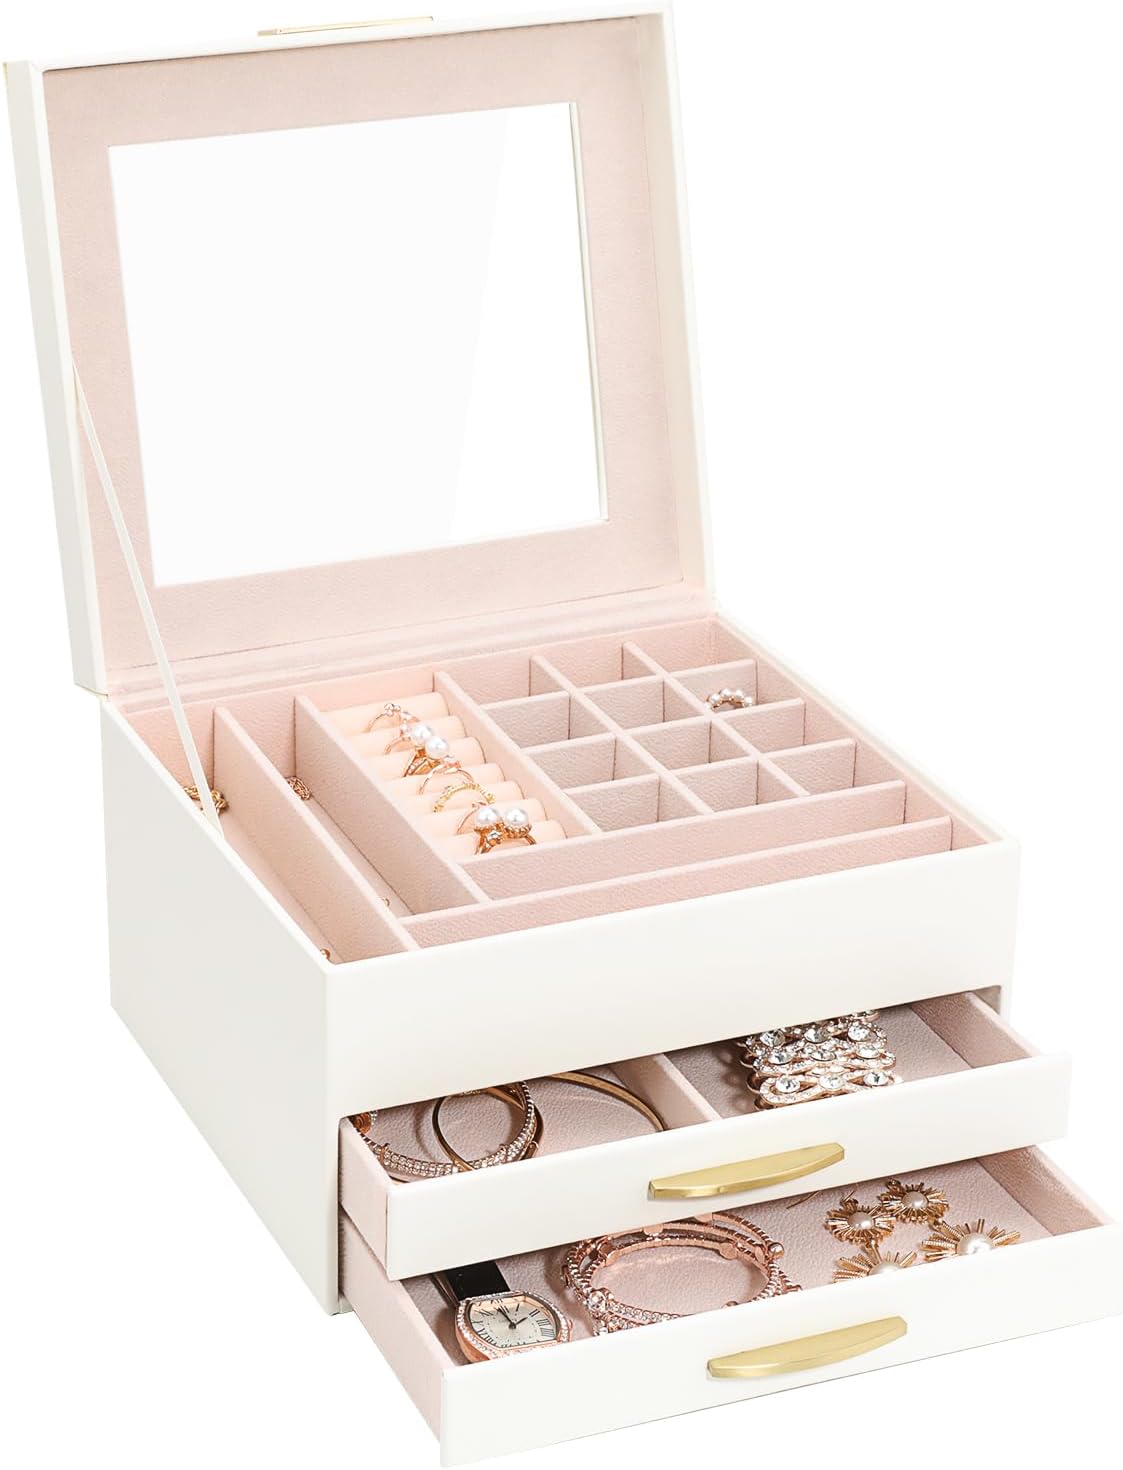 Jewelry Storage Box with Glasses Lid, 3-Tiers Jewelry Organizer Box for Women Girls, Jewelry Case for Rings, Bracelets Earrings, Necklaces (White)